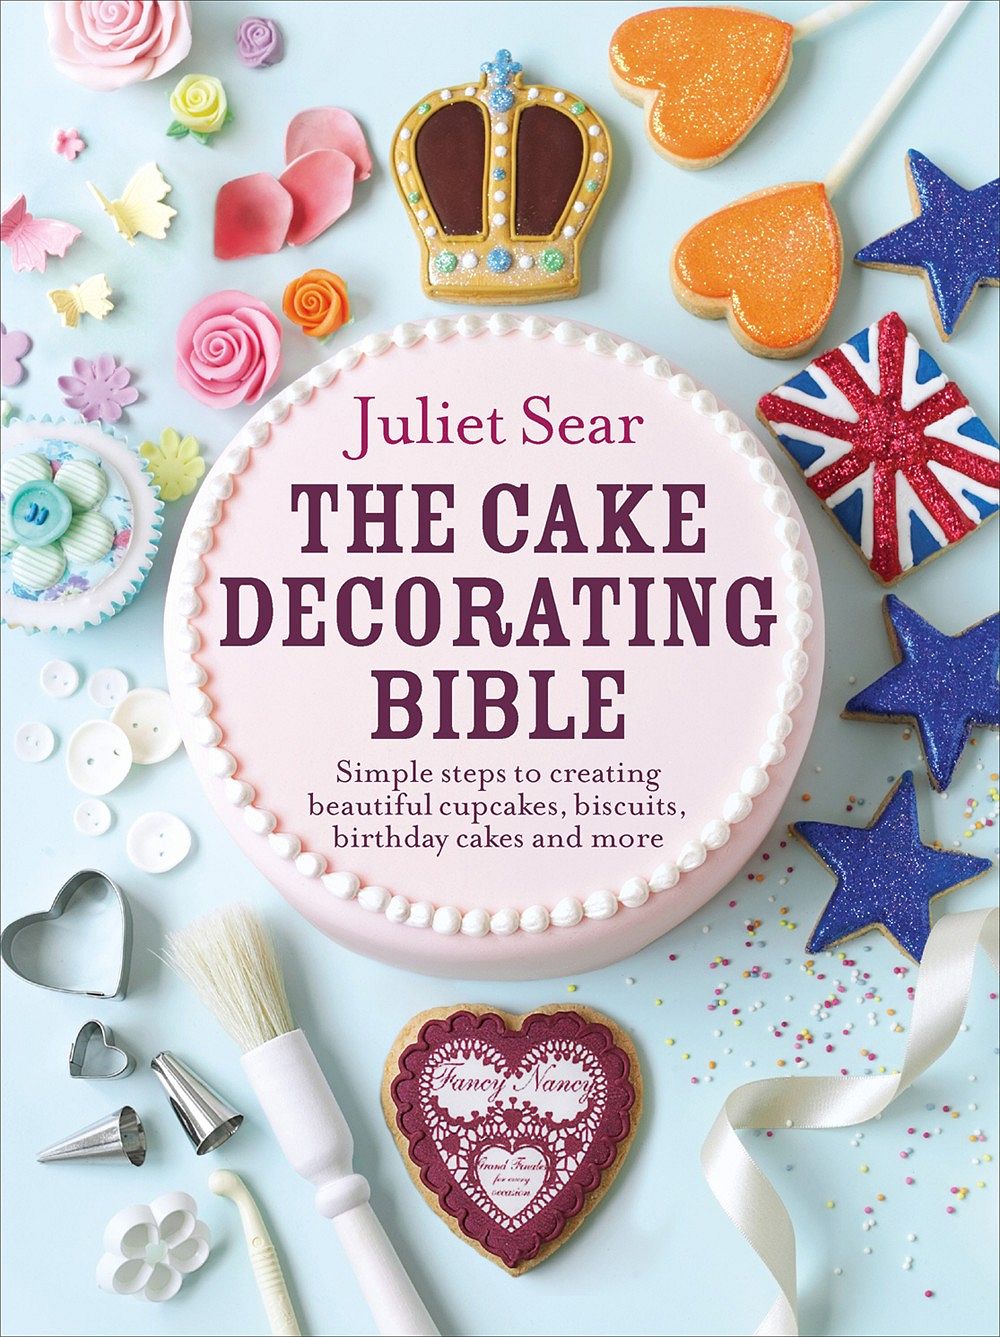 The Cake Decorating Bible: Simple steps to creating beautiful cupcakes